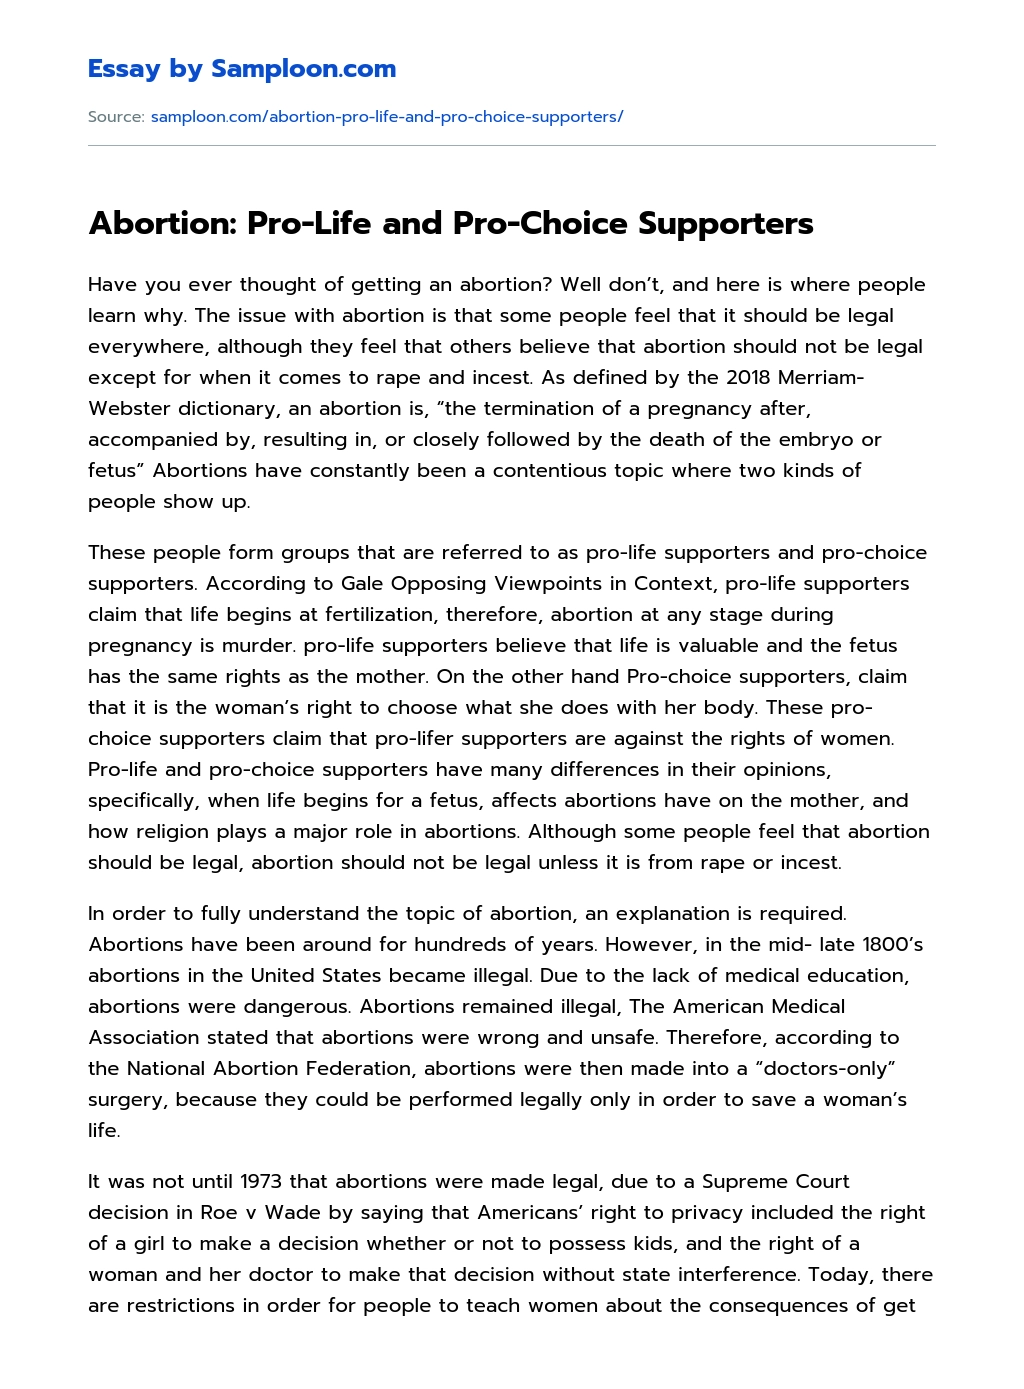 Abortion: Pro-Life and Pro-Choice Supporters Opinion Essay essay